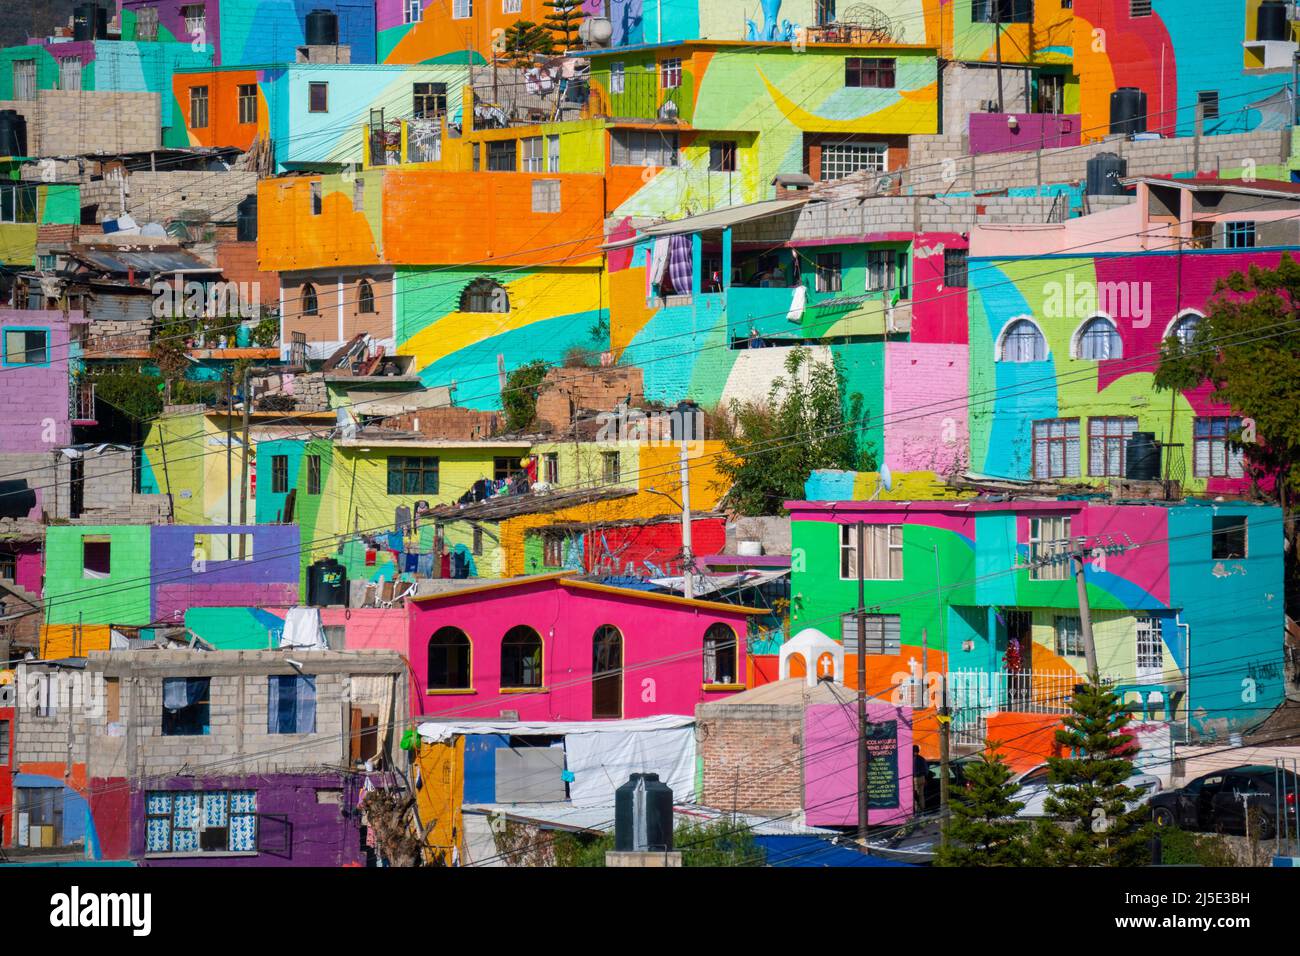 Colorful living district in Pachuca, Hidalgo state, Mexico. Grand Mural - Colorful buildings in Cubitos colonia Stock Photo